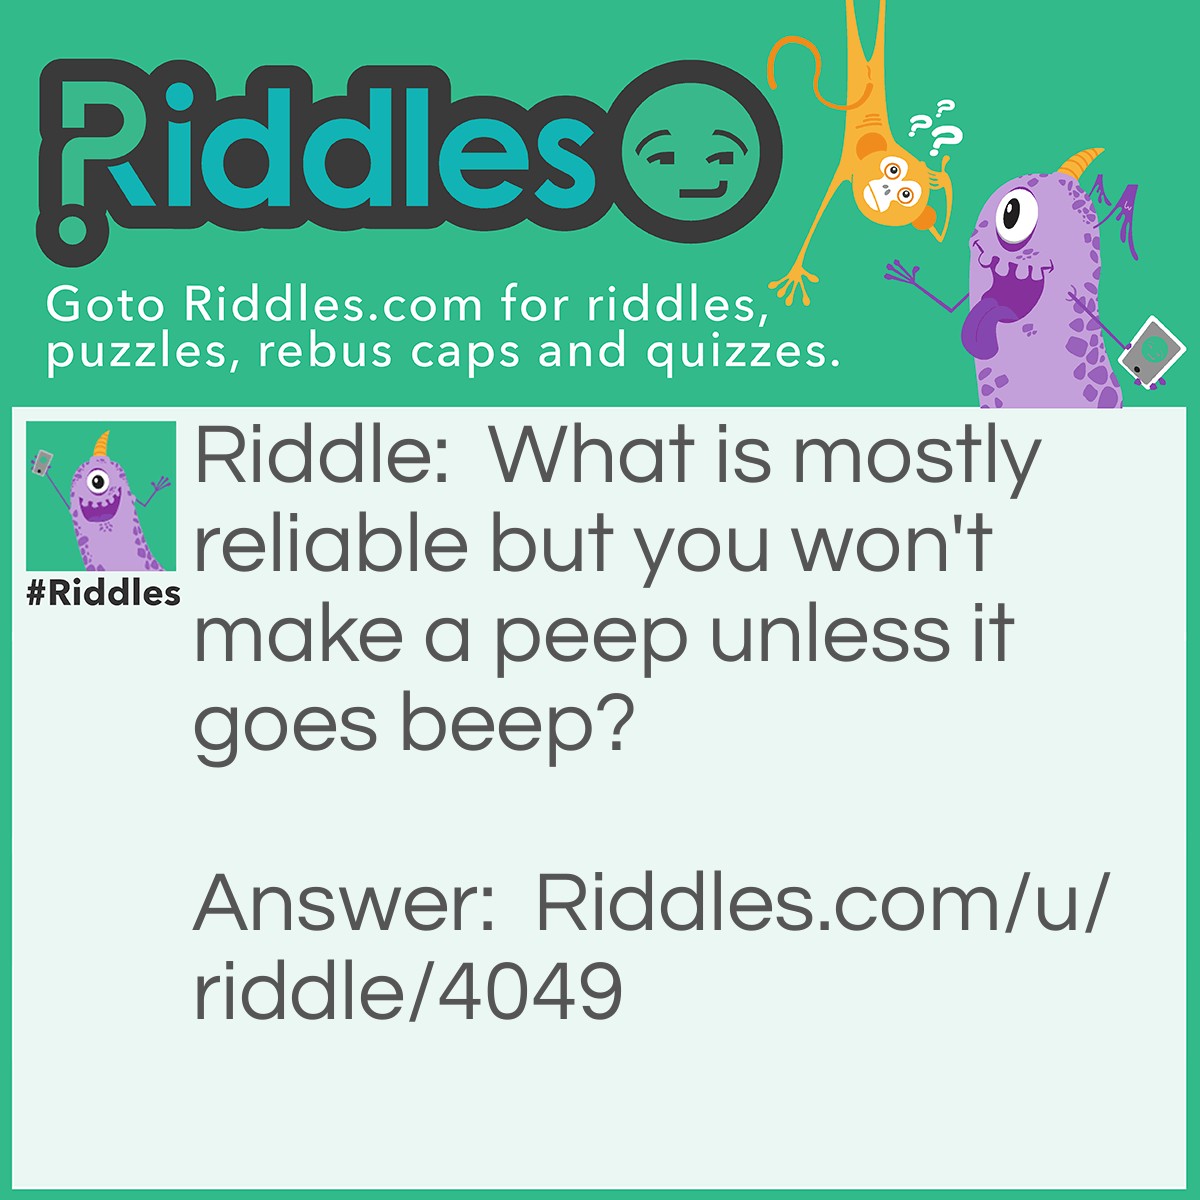 Riddle: What is mostly reliable but you won't make a peep unless it goes beep? Answer: An Alarm Clock.